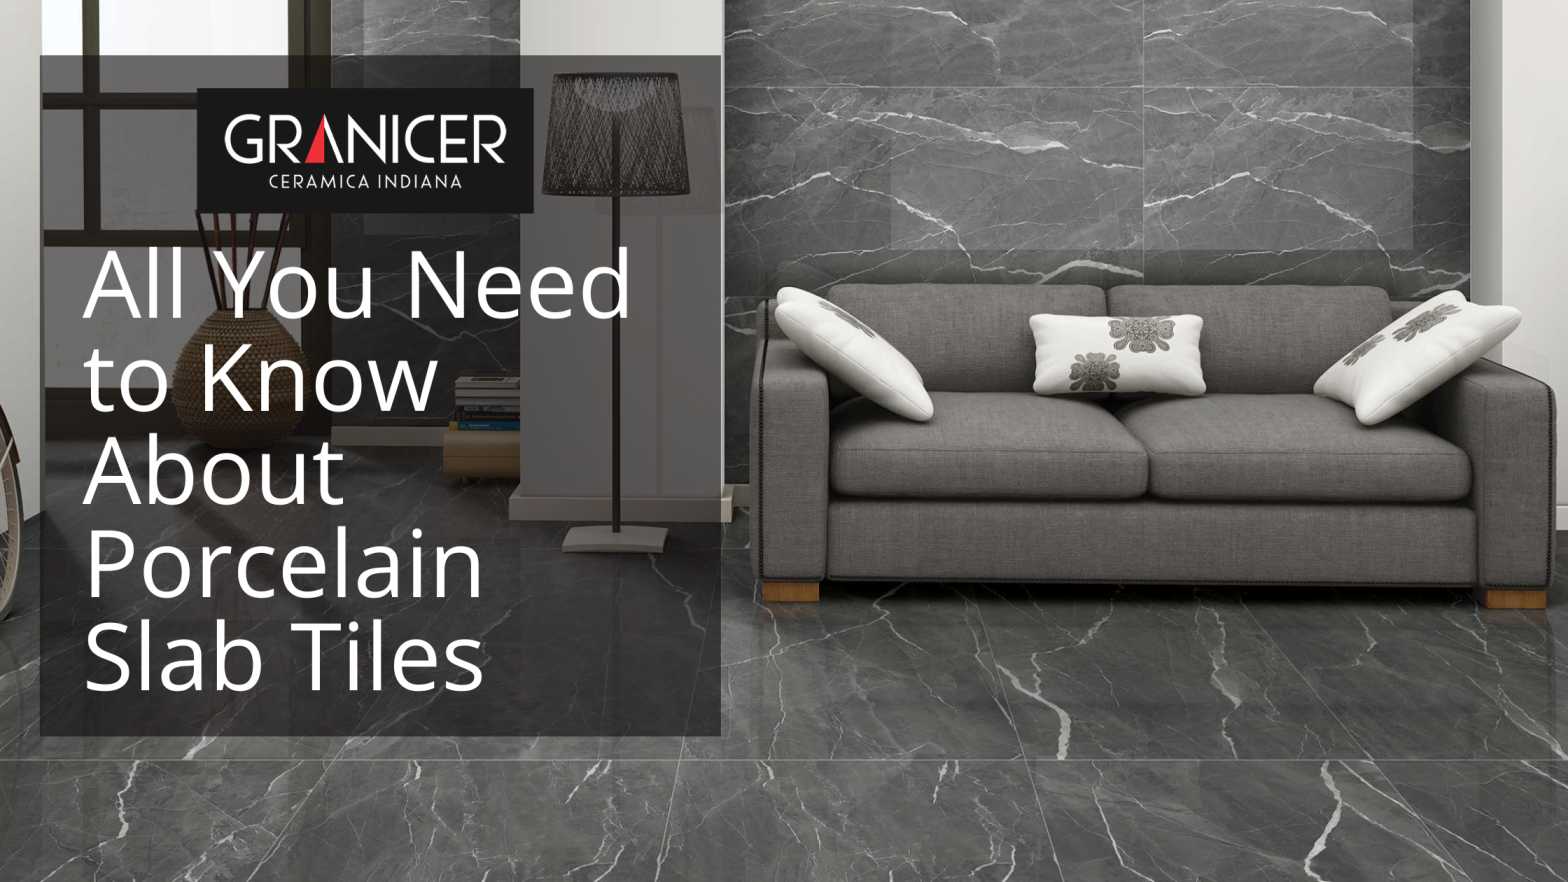 All You Need to Know About Porcelain Slab Tiles - WriteUpCafe.com